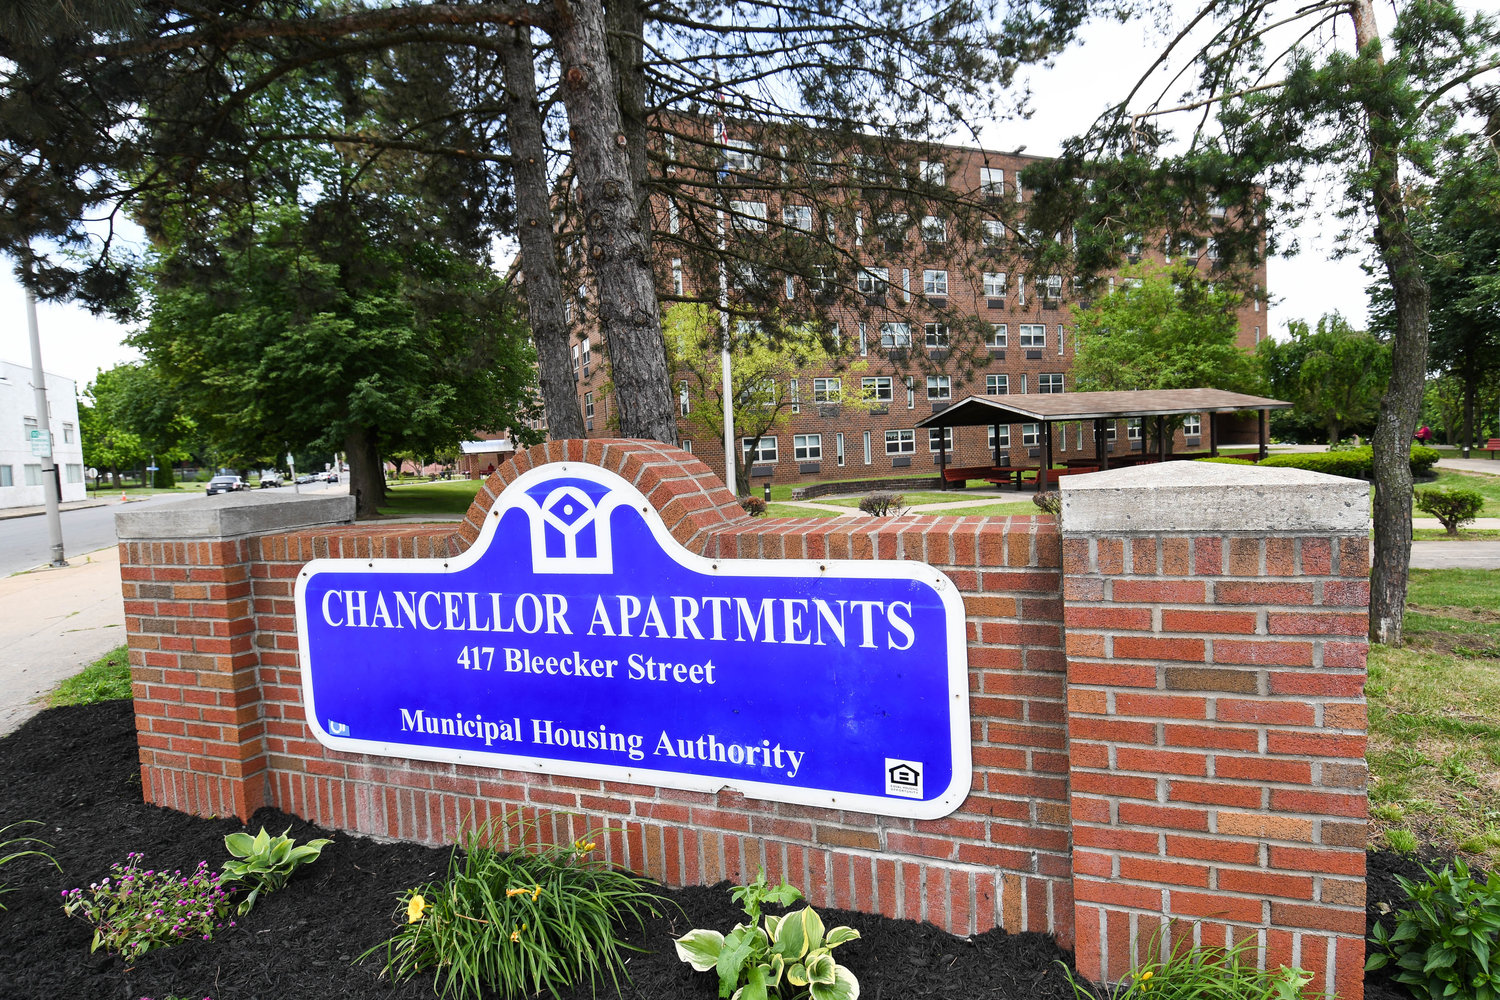 Chancellor Apartments at 417 Bleecker Street in Utica will undergo a major renovation, according to officials with People First, formerly known as Utica Municipal Housing Authority.